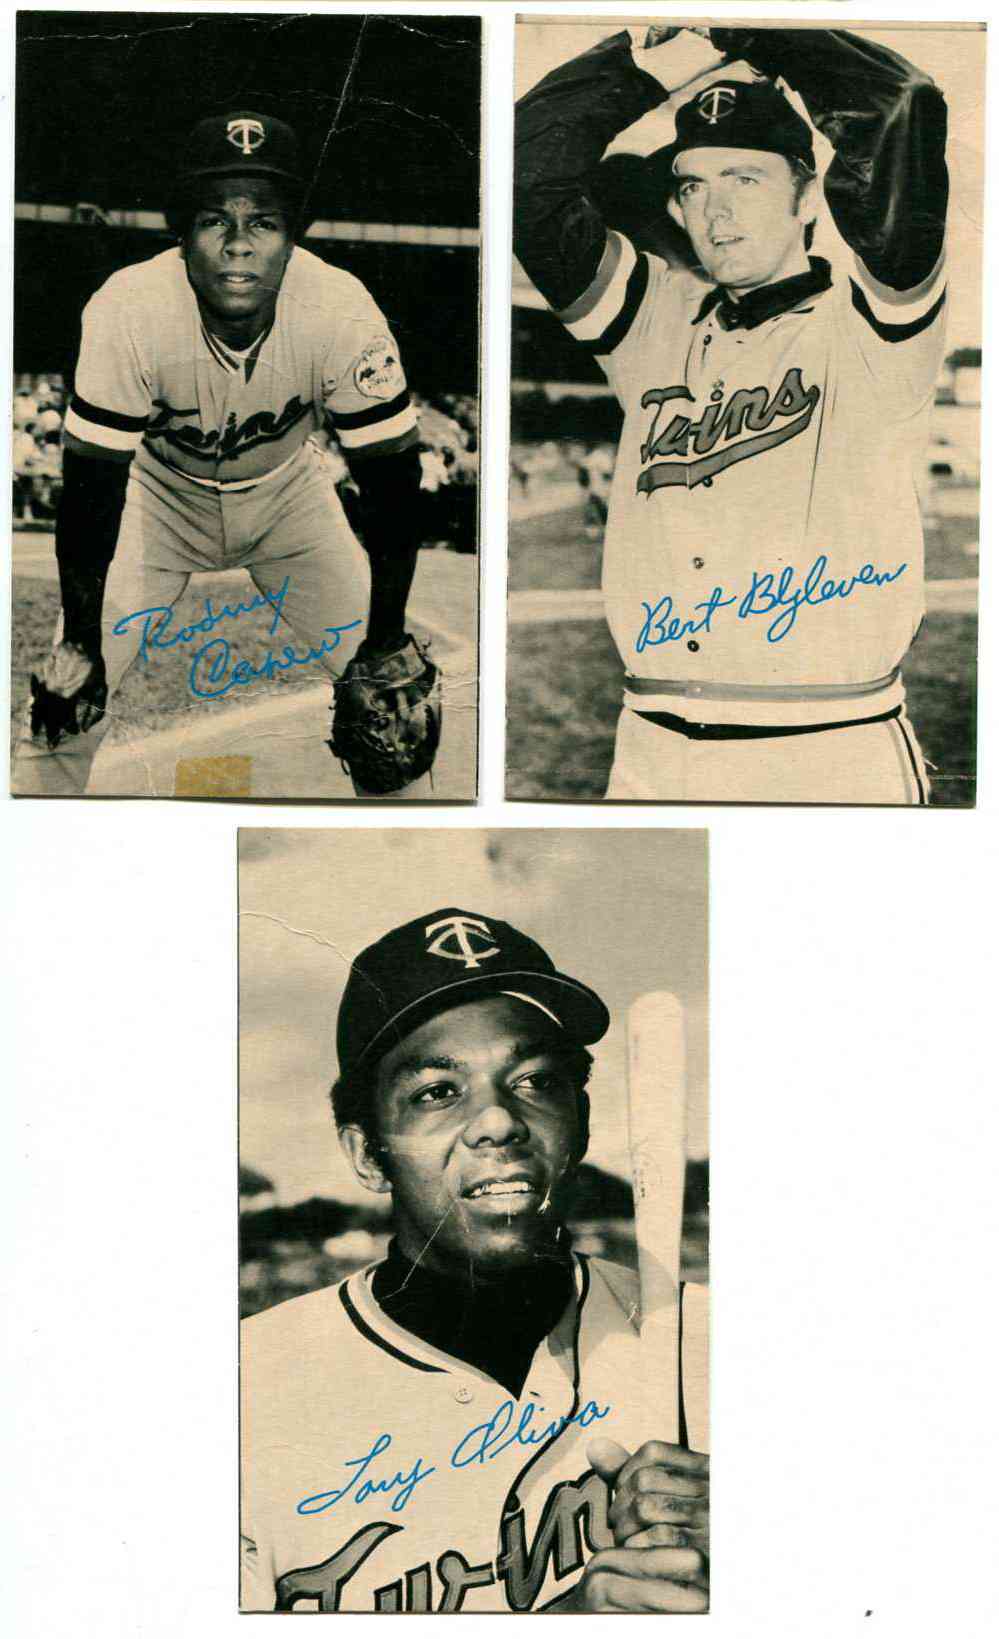  Twins Team Set - 1974 Topps Deckle Edge PROOFS [WB] (3 cards) w/ROD CAREW Baseball cards value